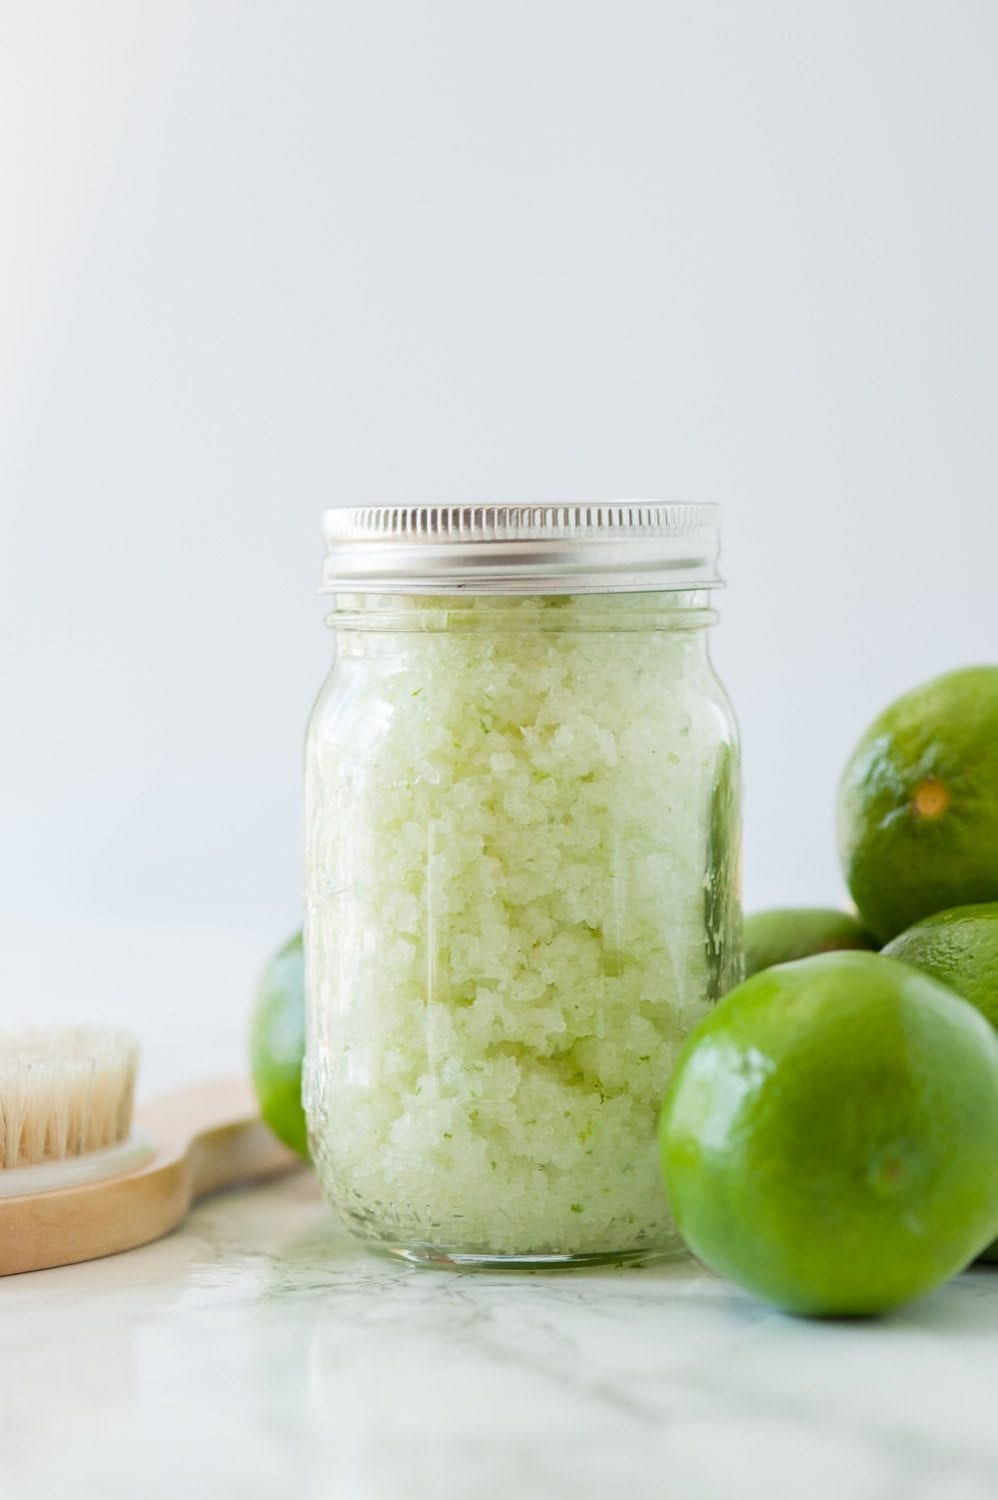 Homemade Body Scrub | Homemade Mother's Day Gift Ideas and DIY Gift Ideas from @cydconverse